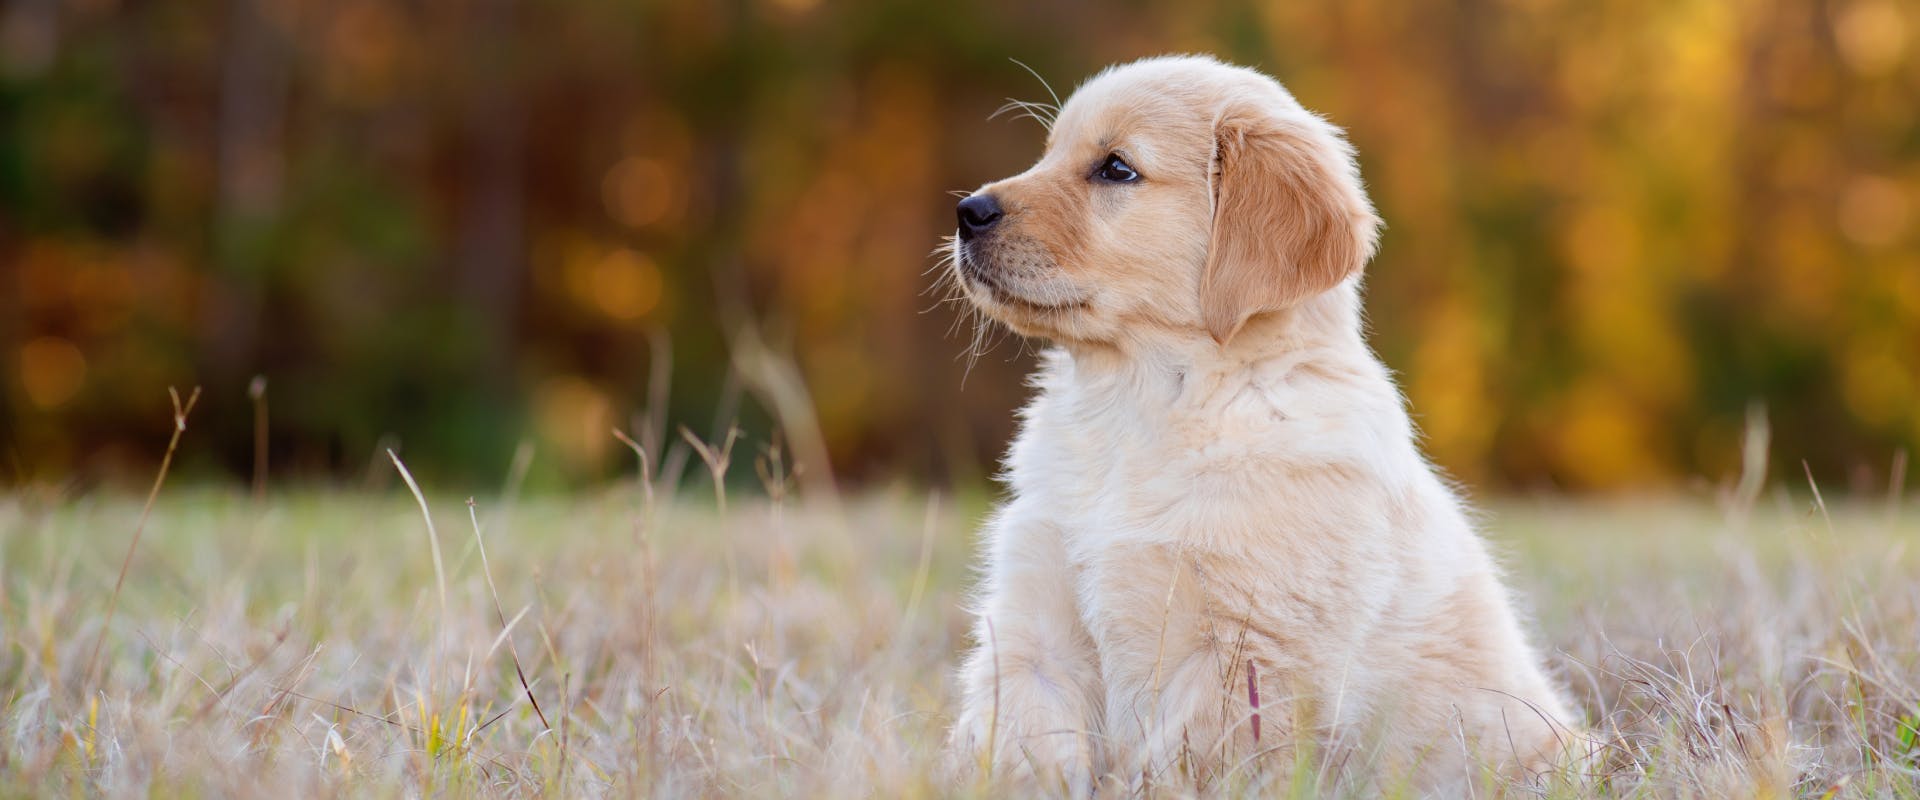 a golden retriever puppy sat in a grass field looking off to the left